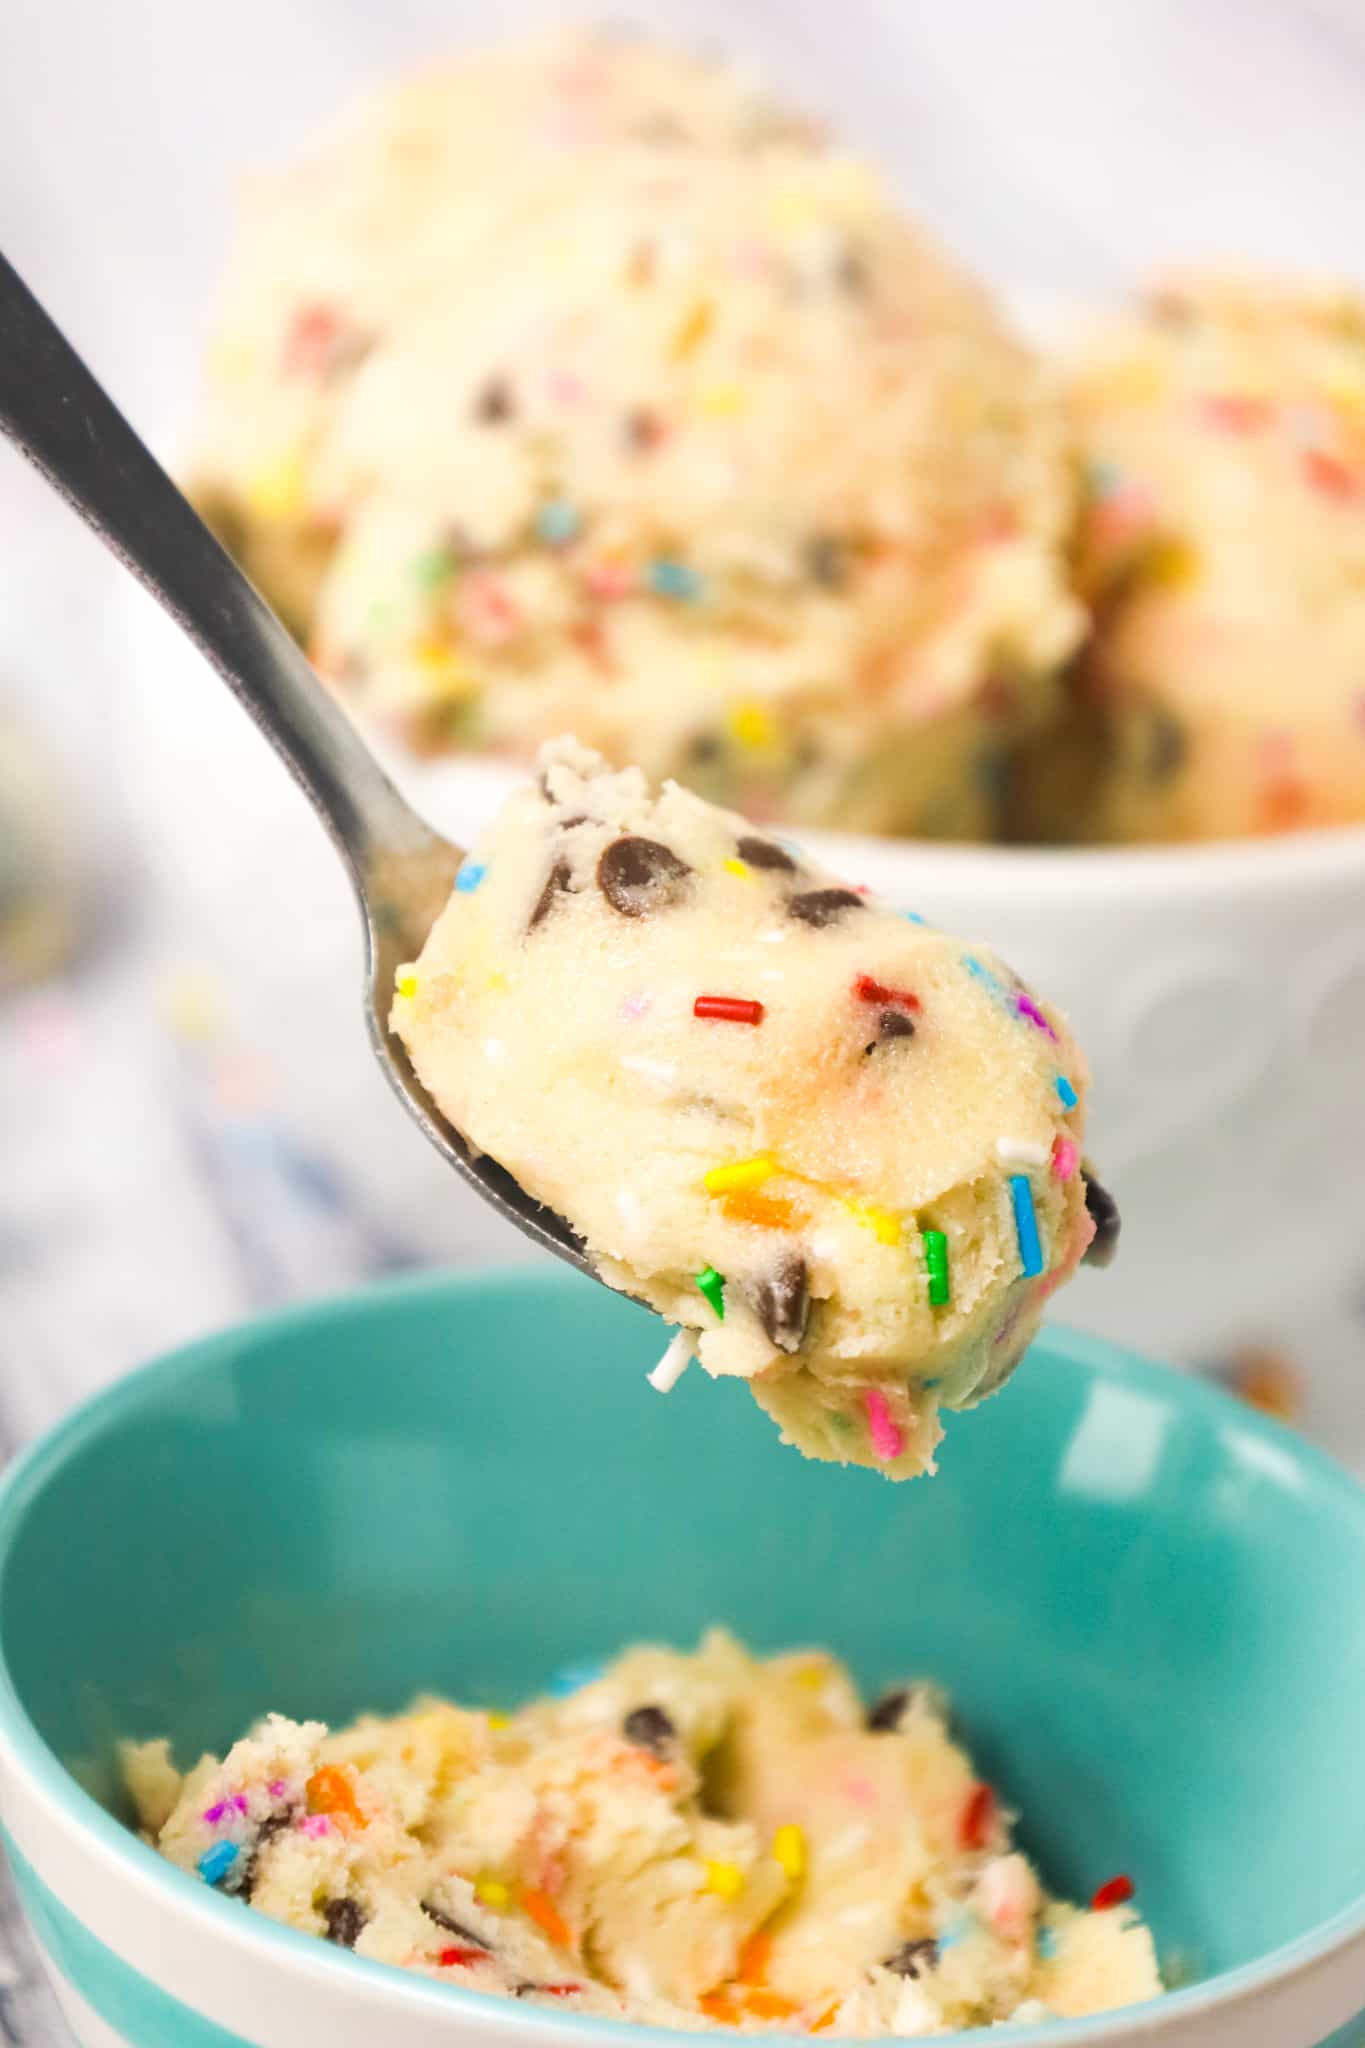 Edible Sugar Cookie Dough is a tasty eggless cookie dough loaded with colourful sprinkles and mini semi sweet chocolate chips.